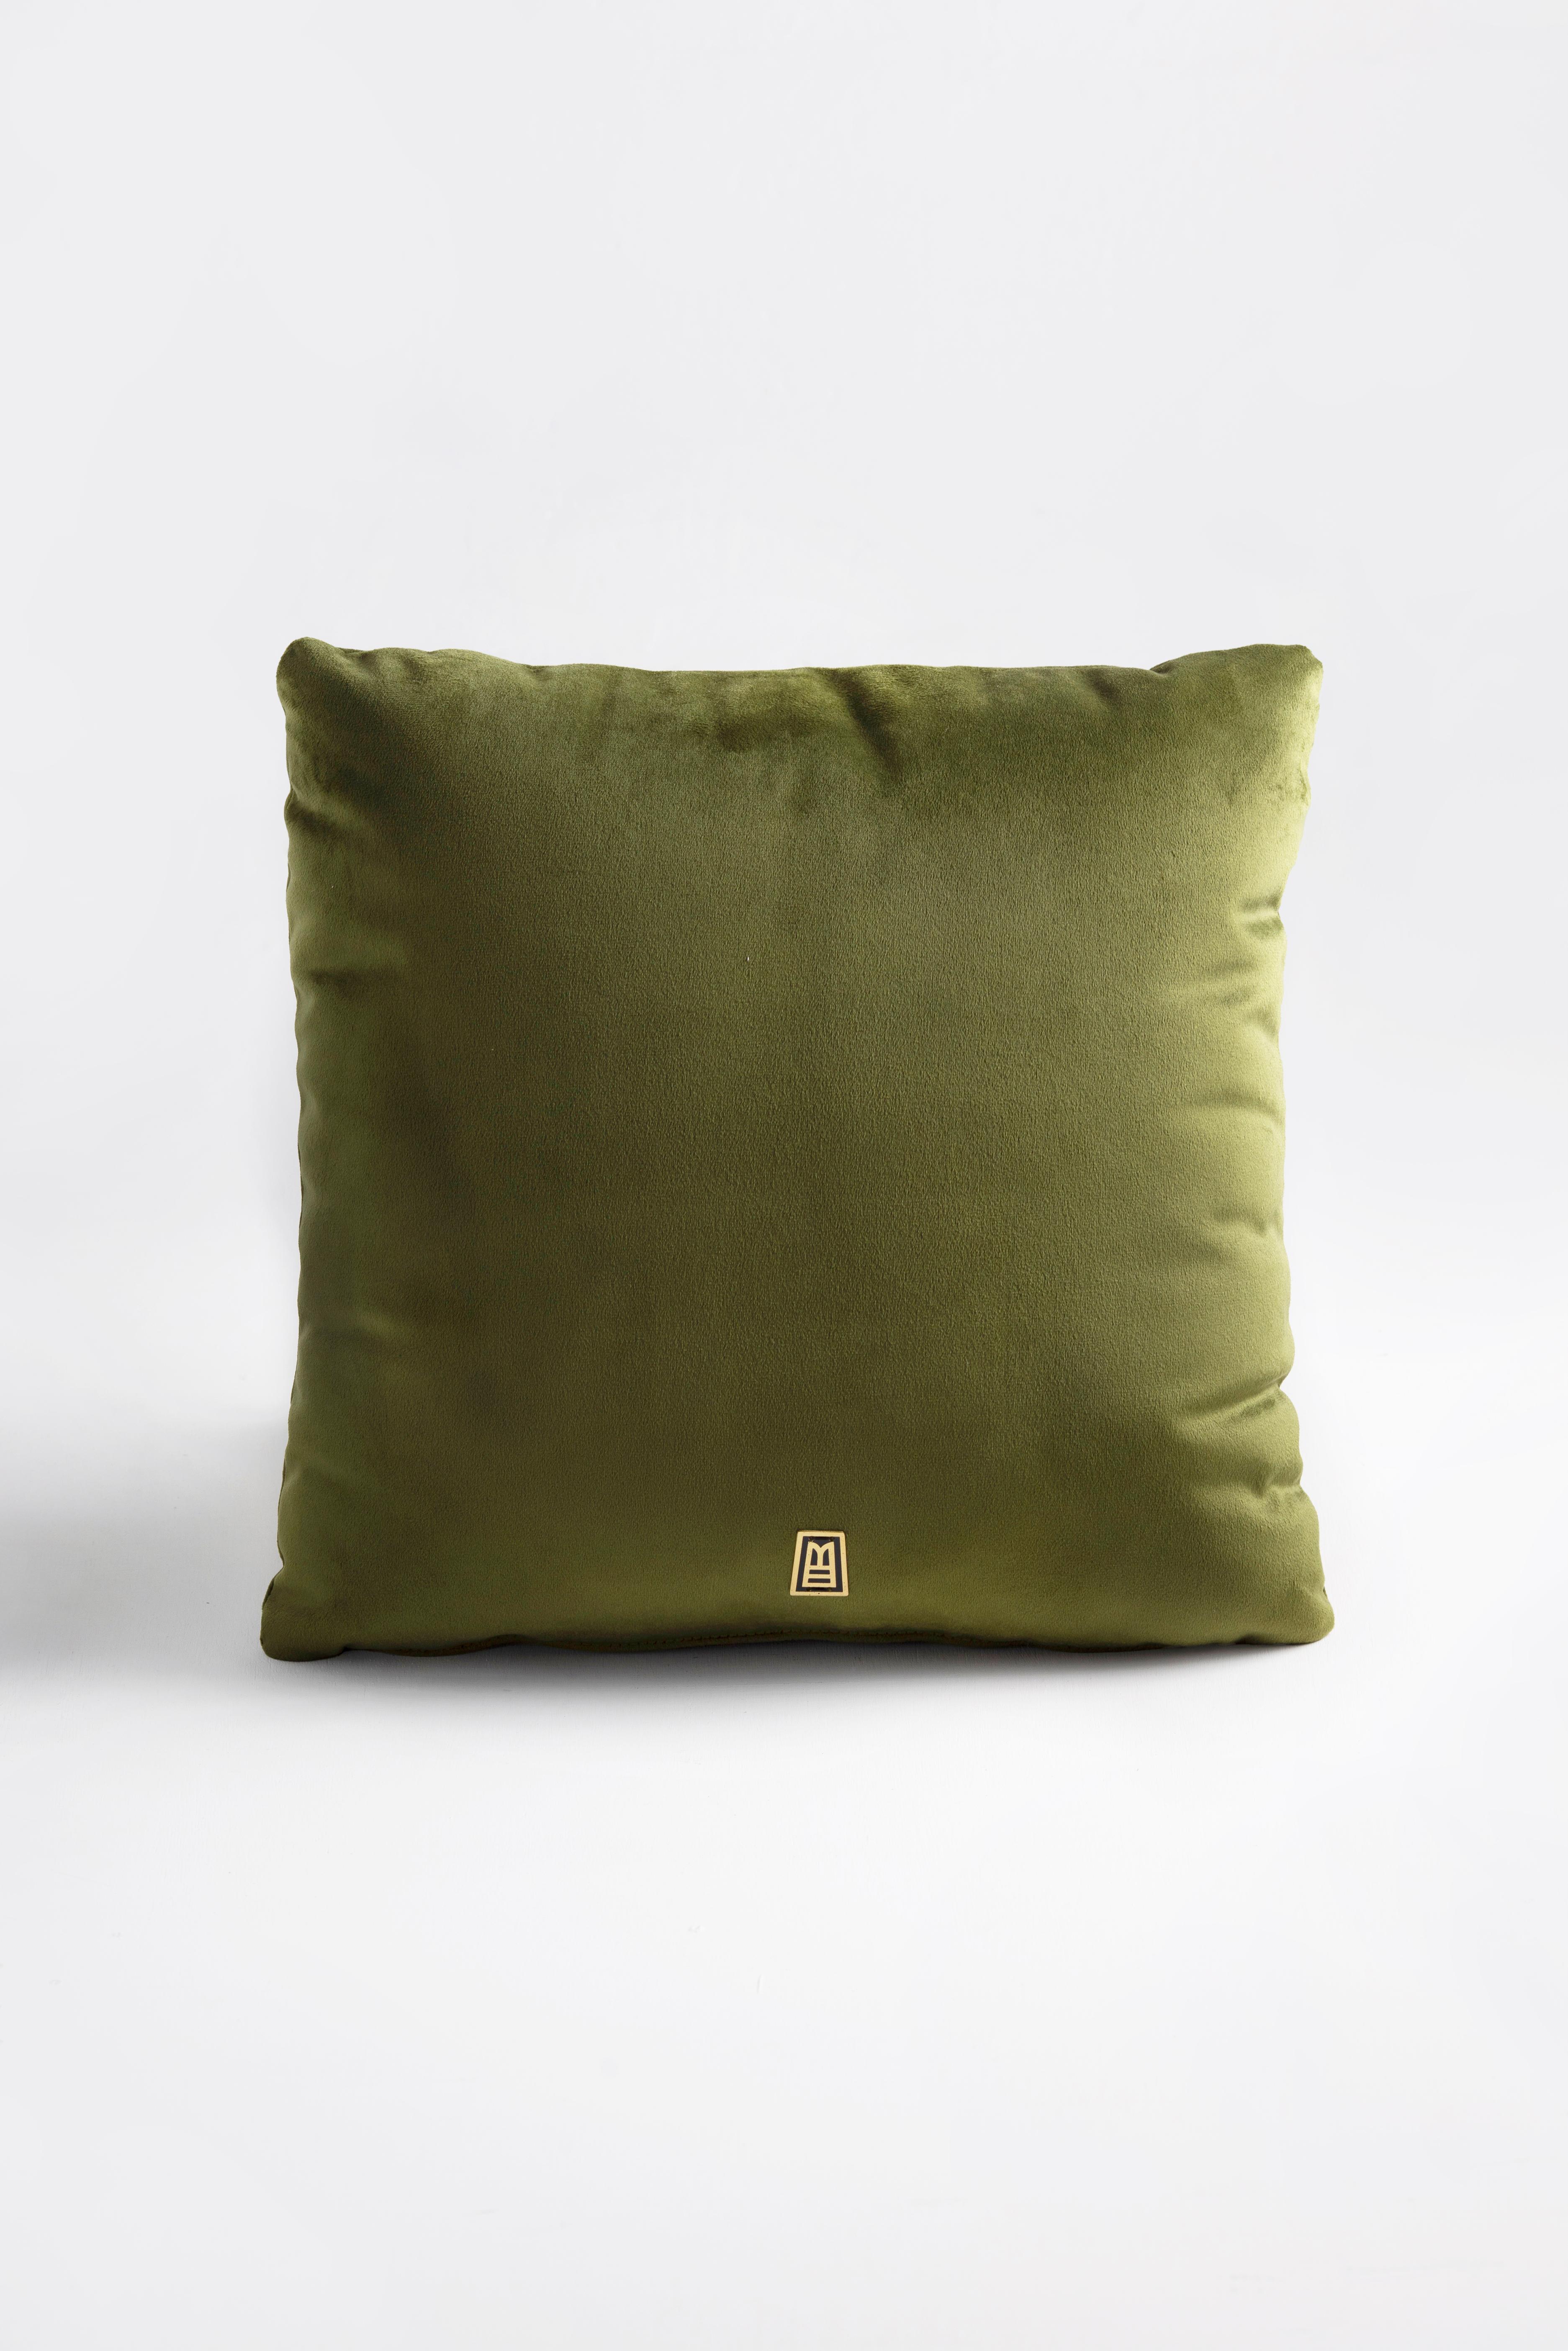 LLAMA Hand Embroidered Decorative Pillows in Olive Velvet by ANDEAN, Set of 2 In New Condition For Sale In Quito, EC